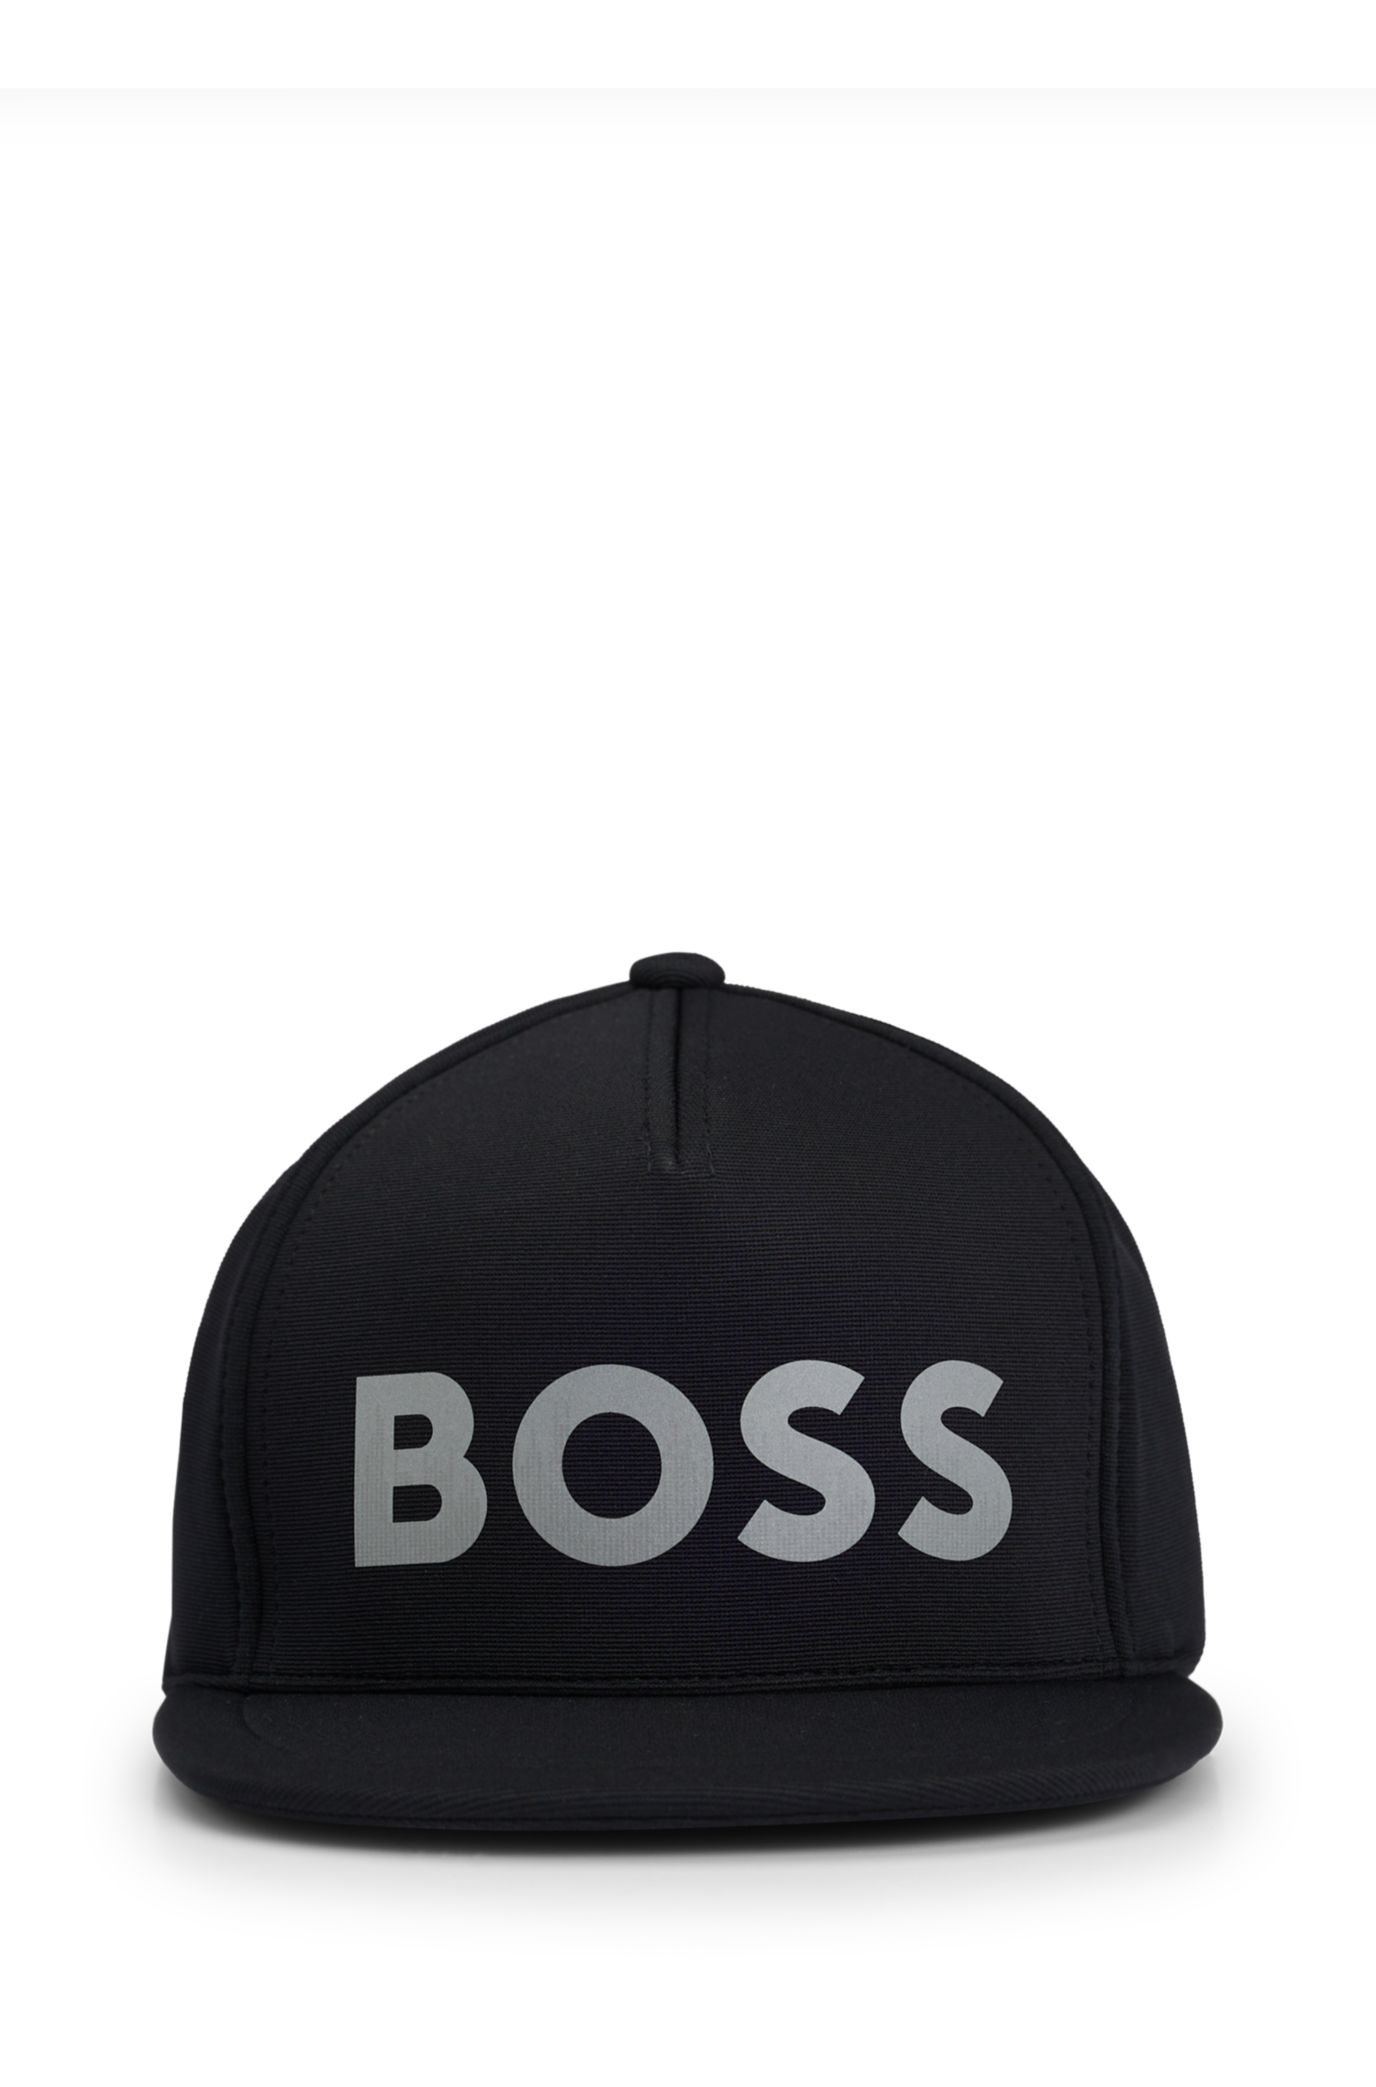 BOSS - Stretch-jersey cap logo decorative with reflective